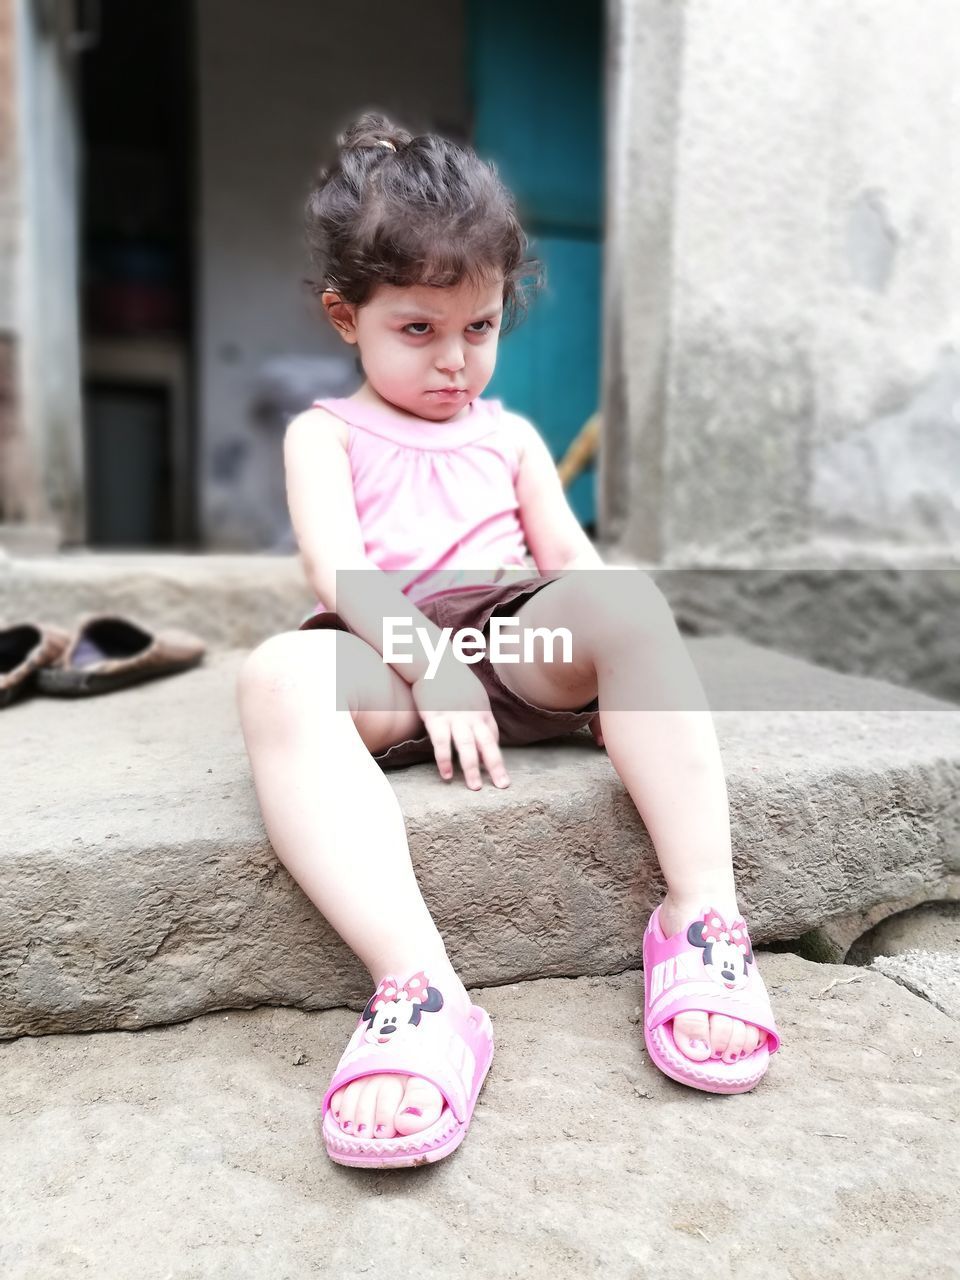 CUTE GIRL SITTING IN PINK WHILE LOOKING AT CAMERA